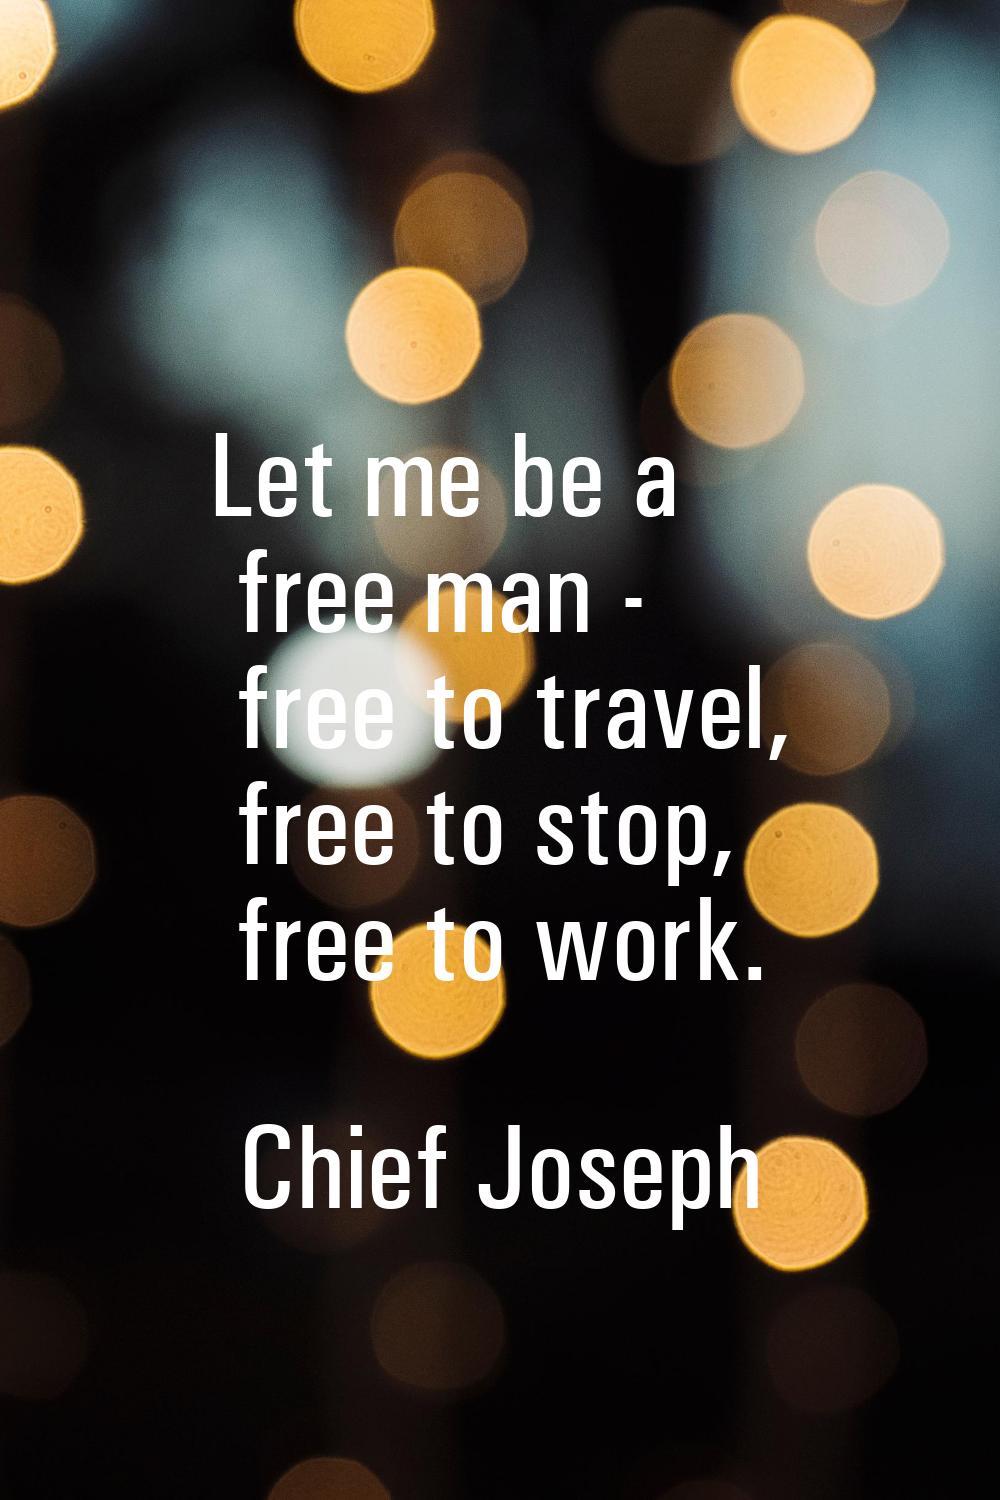 Let me be a free man - free to travel, free to stop, free to work.